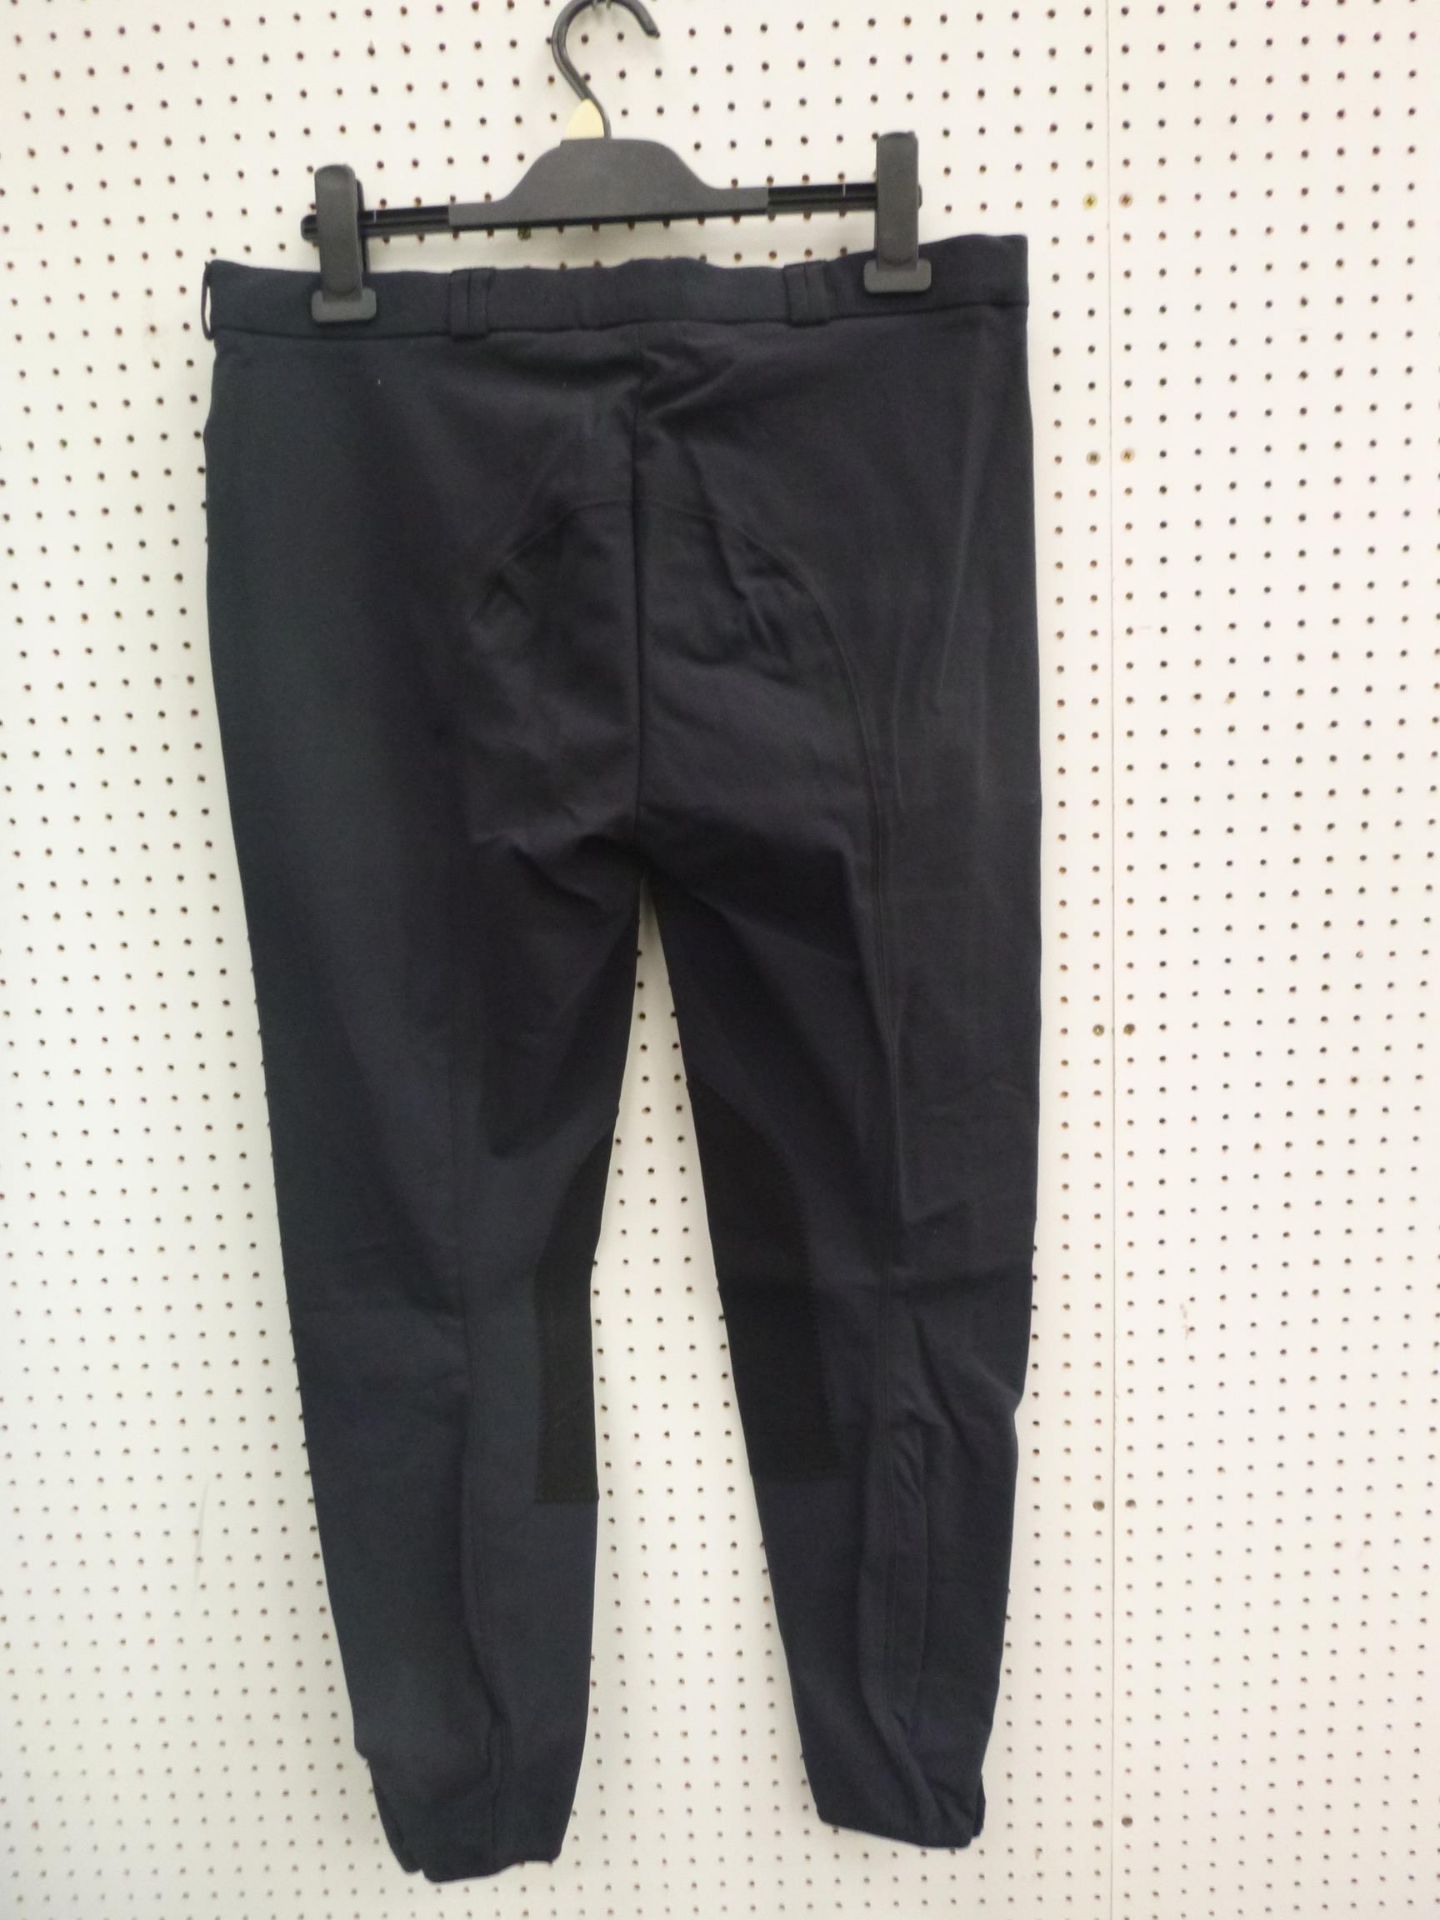 * Two pairs of new Bridleway Ladies Woven Cotton/Nylon Breeches size 34R, one Brown the other - Image 2 of 4